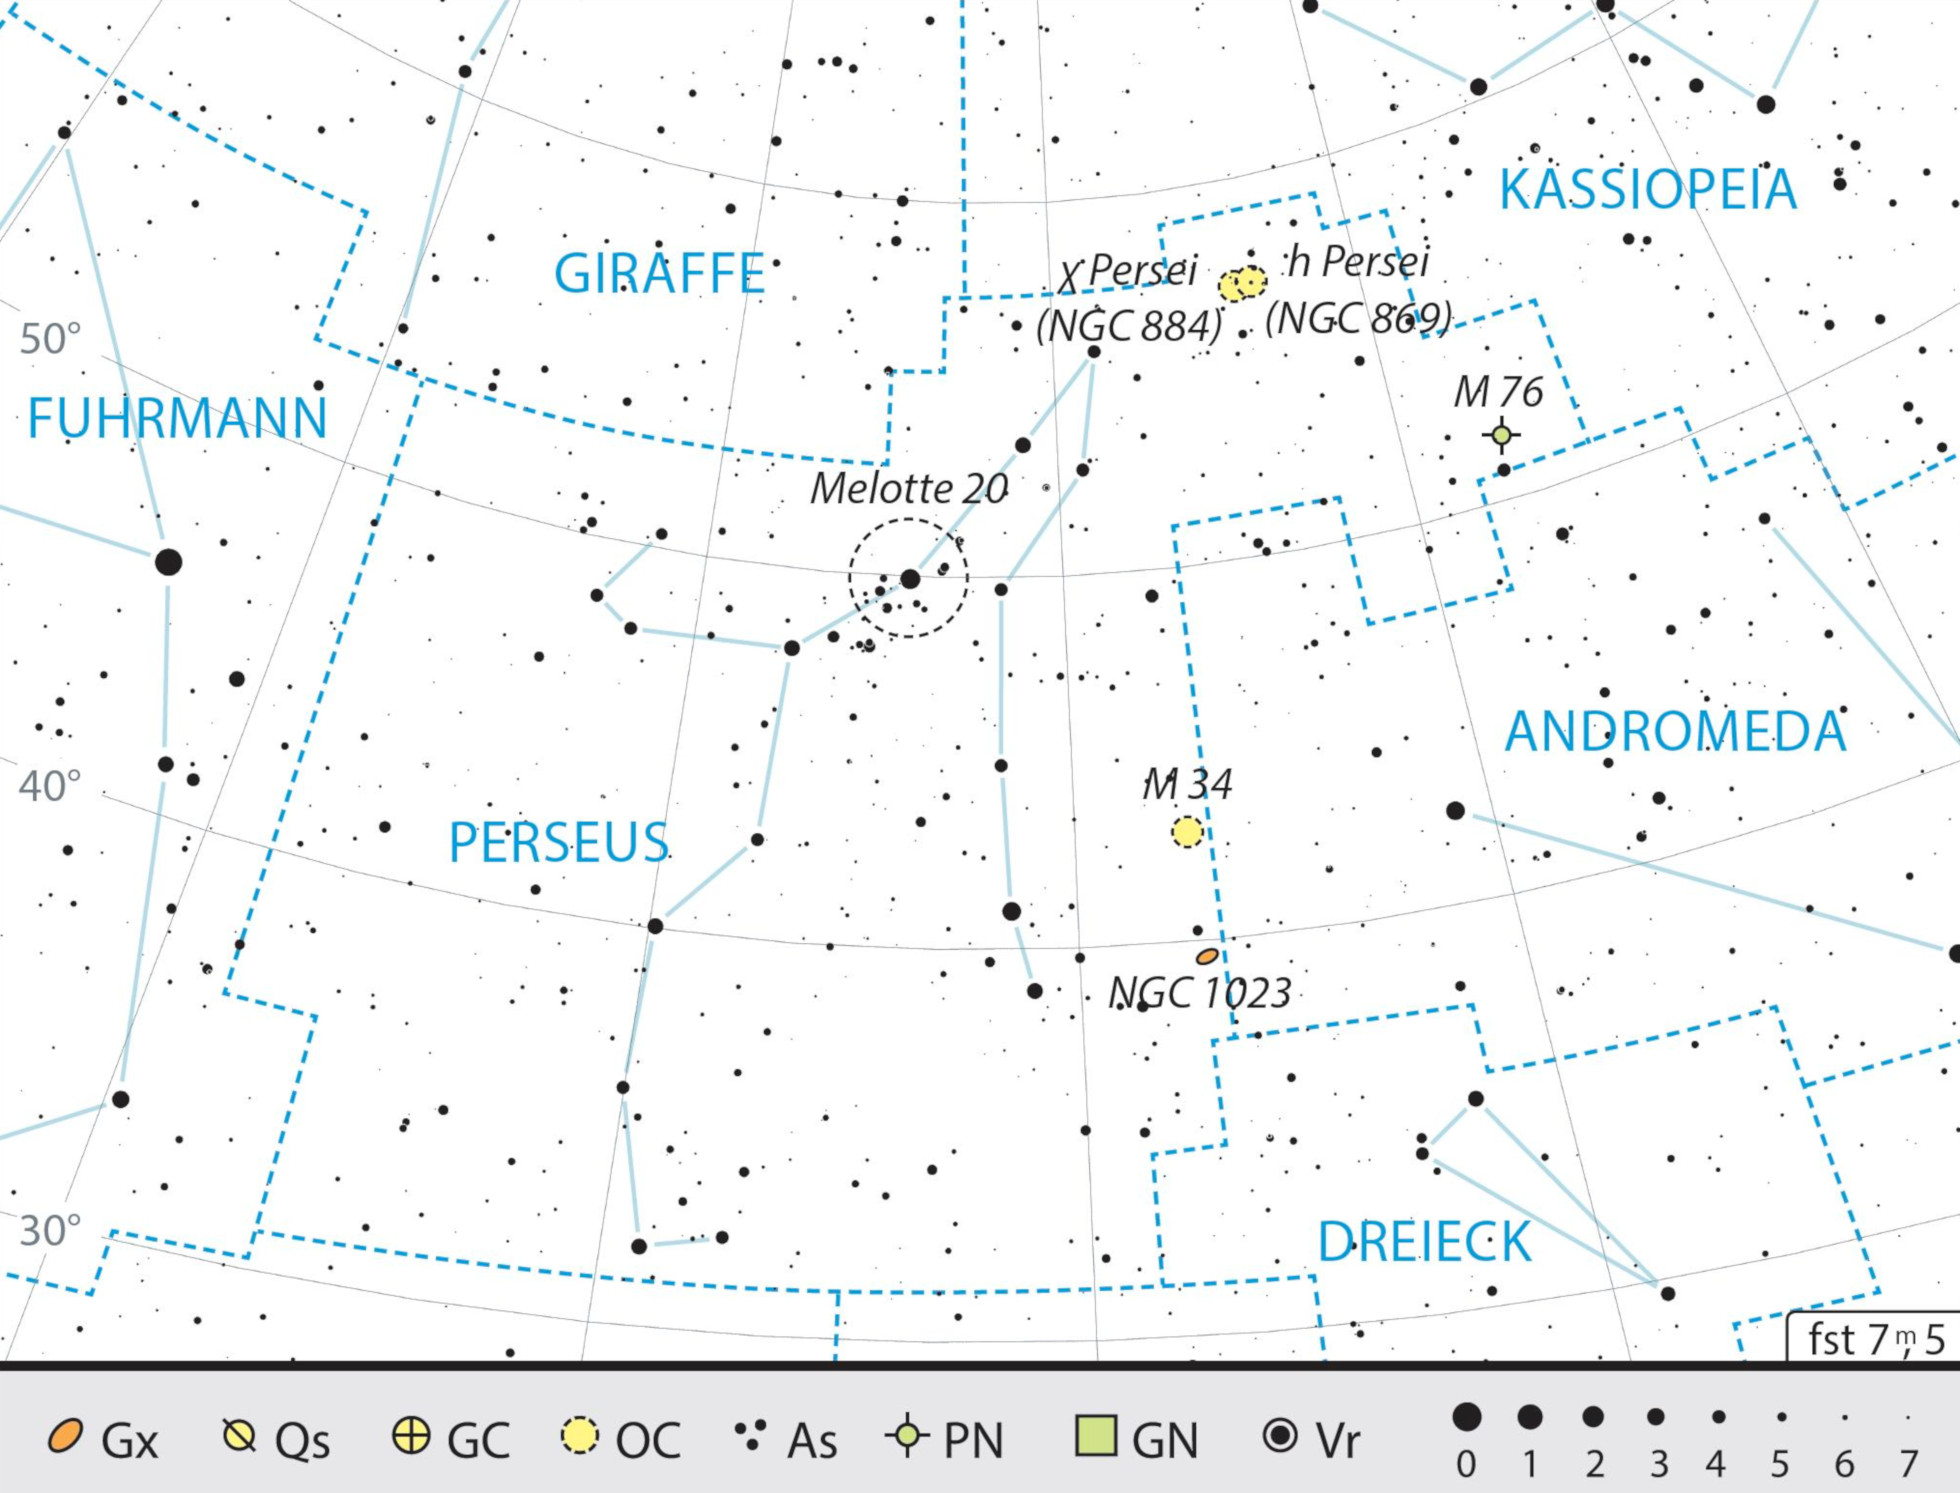 Outline map of the constellation of Perseus with our observing recommendations. J. Scholten